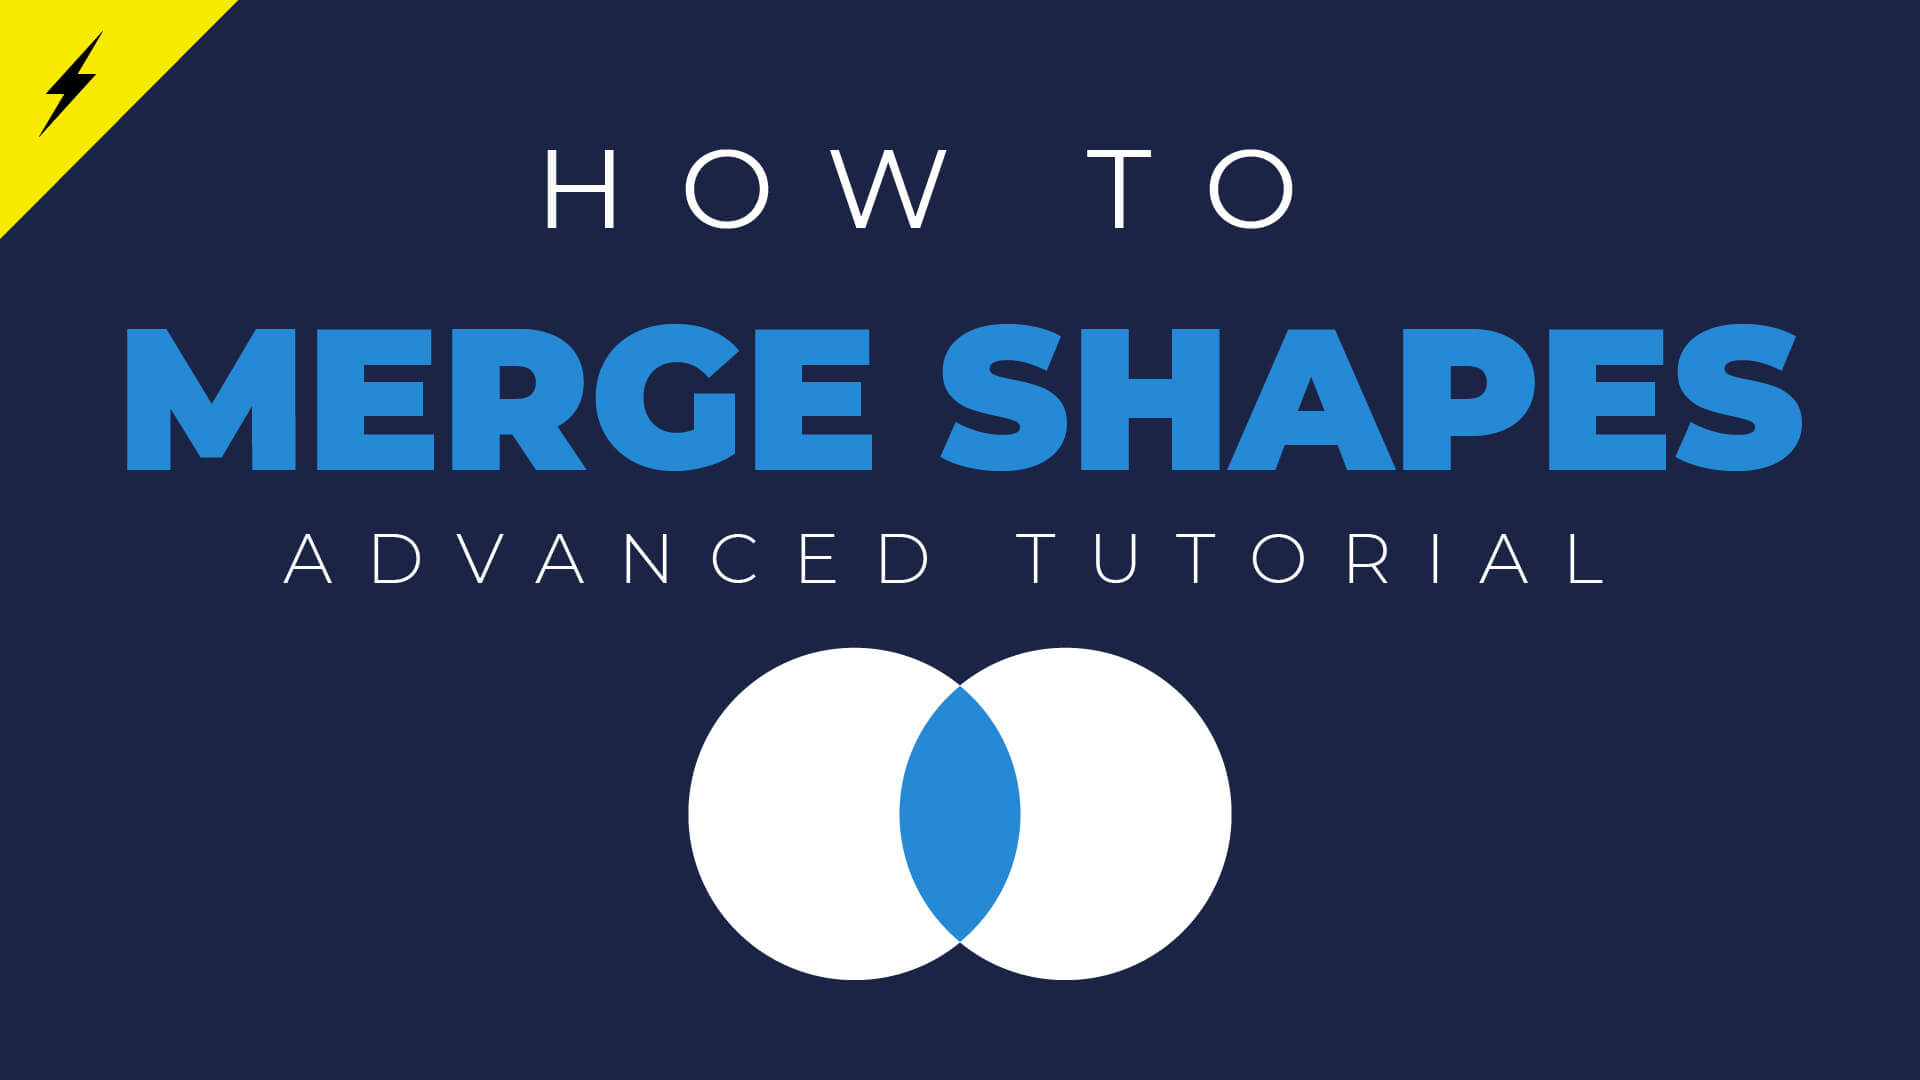 merge shapes in powerpoint